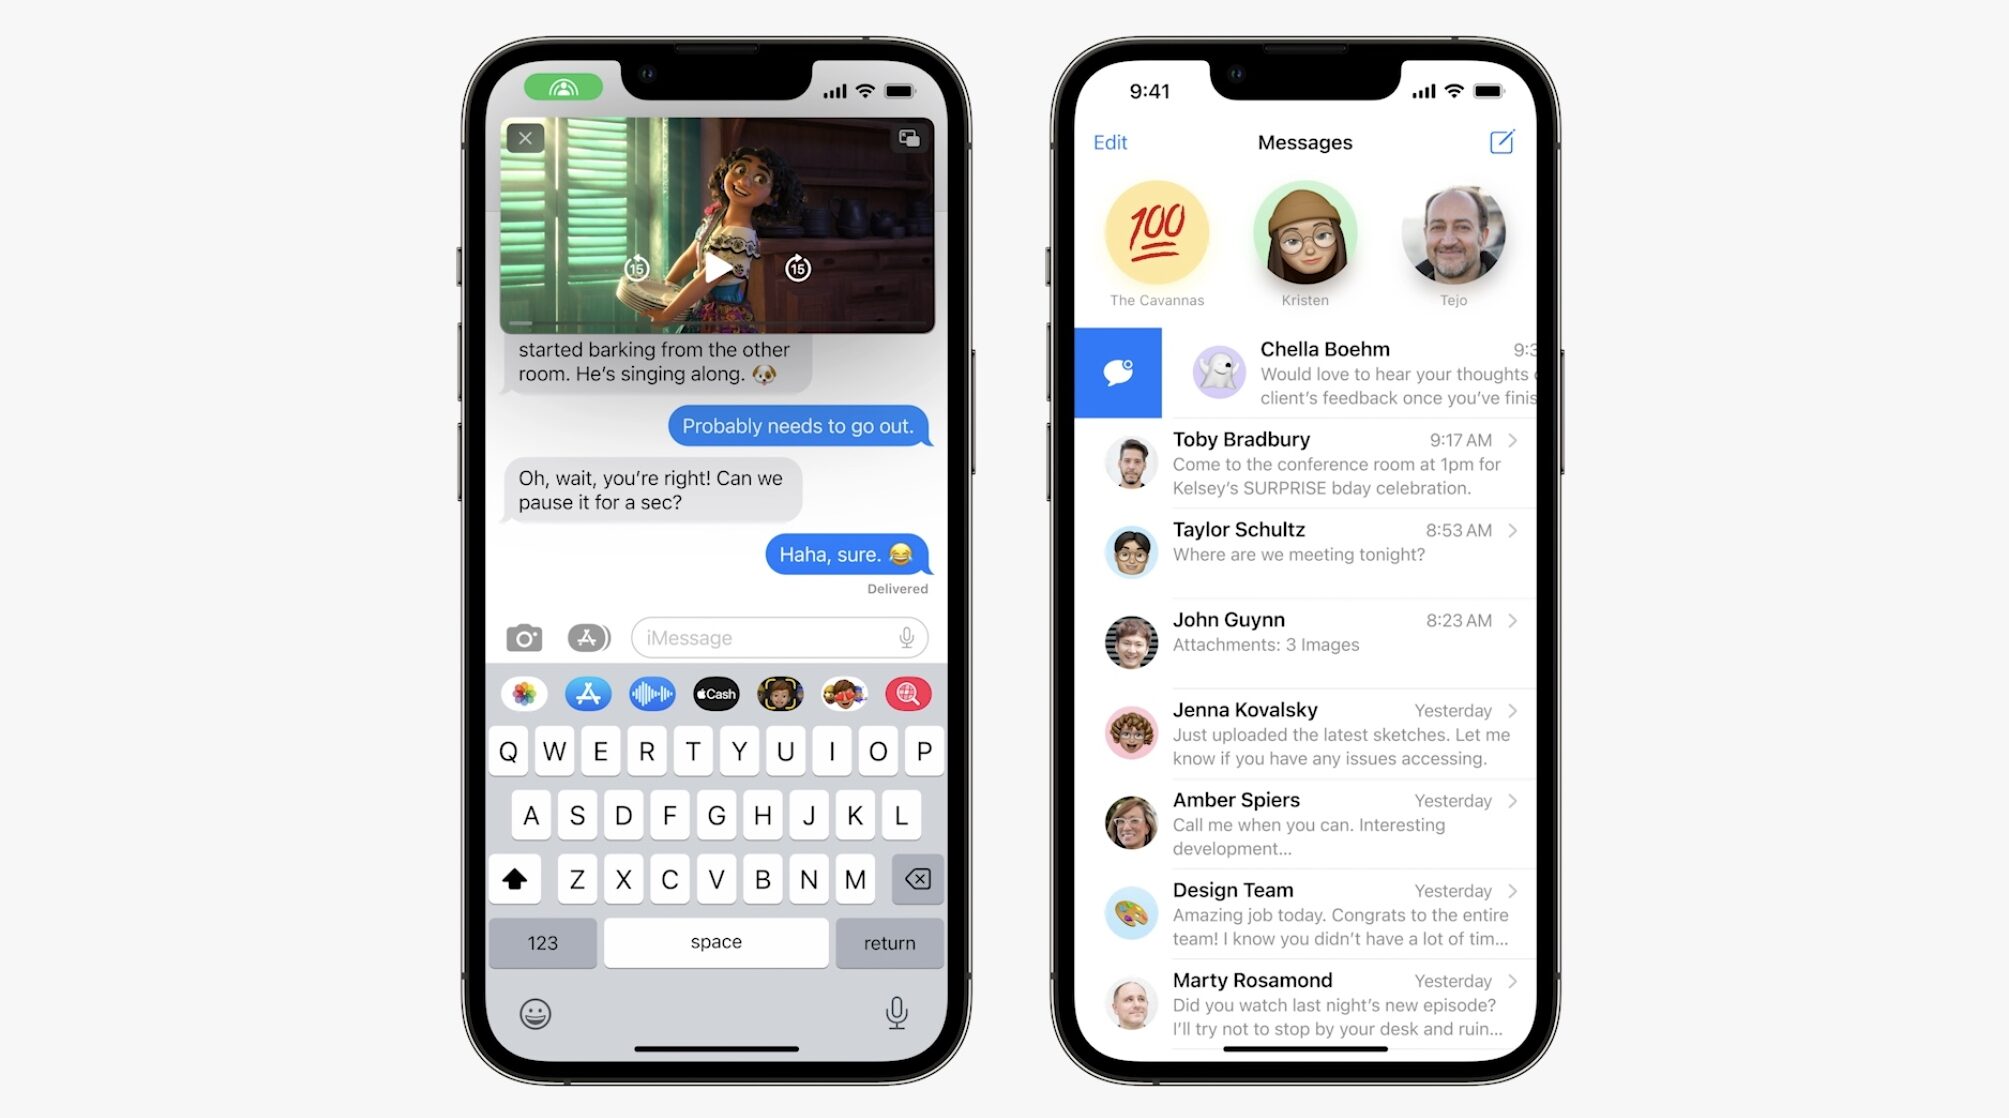 Marketing image showcasing the new Messages features on iOS 16